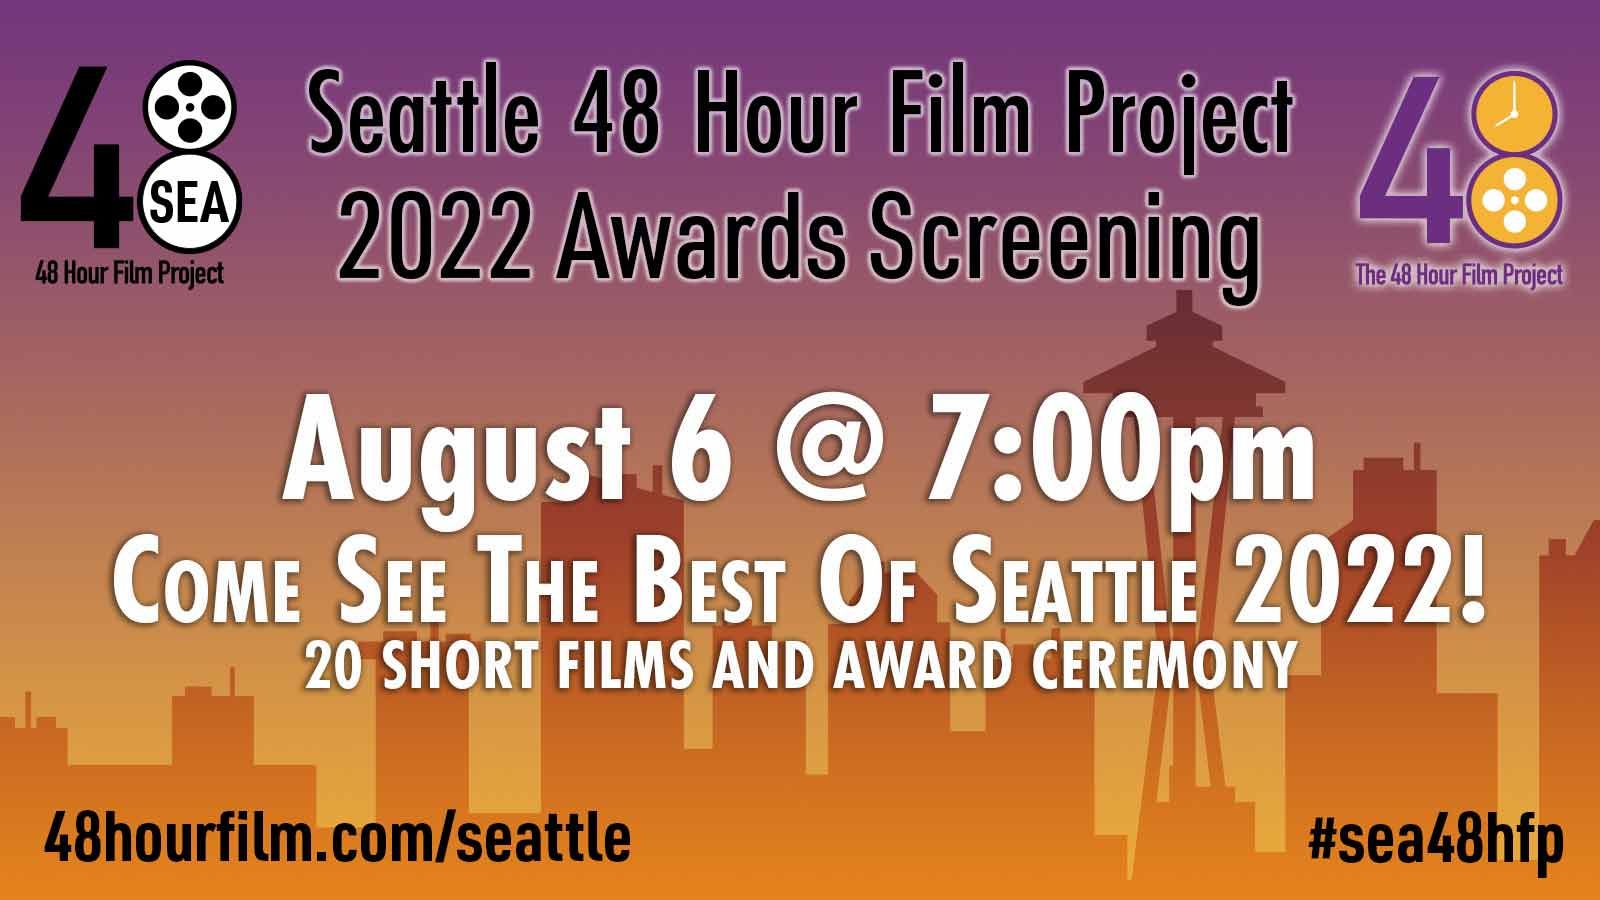 Seattle 48 Hour Film Project Awards